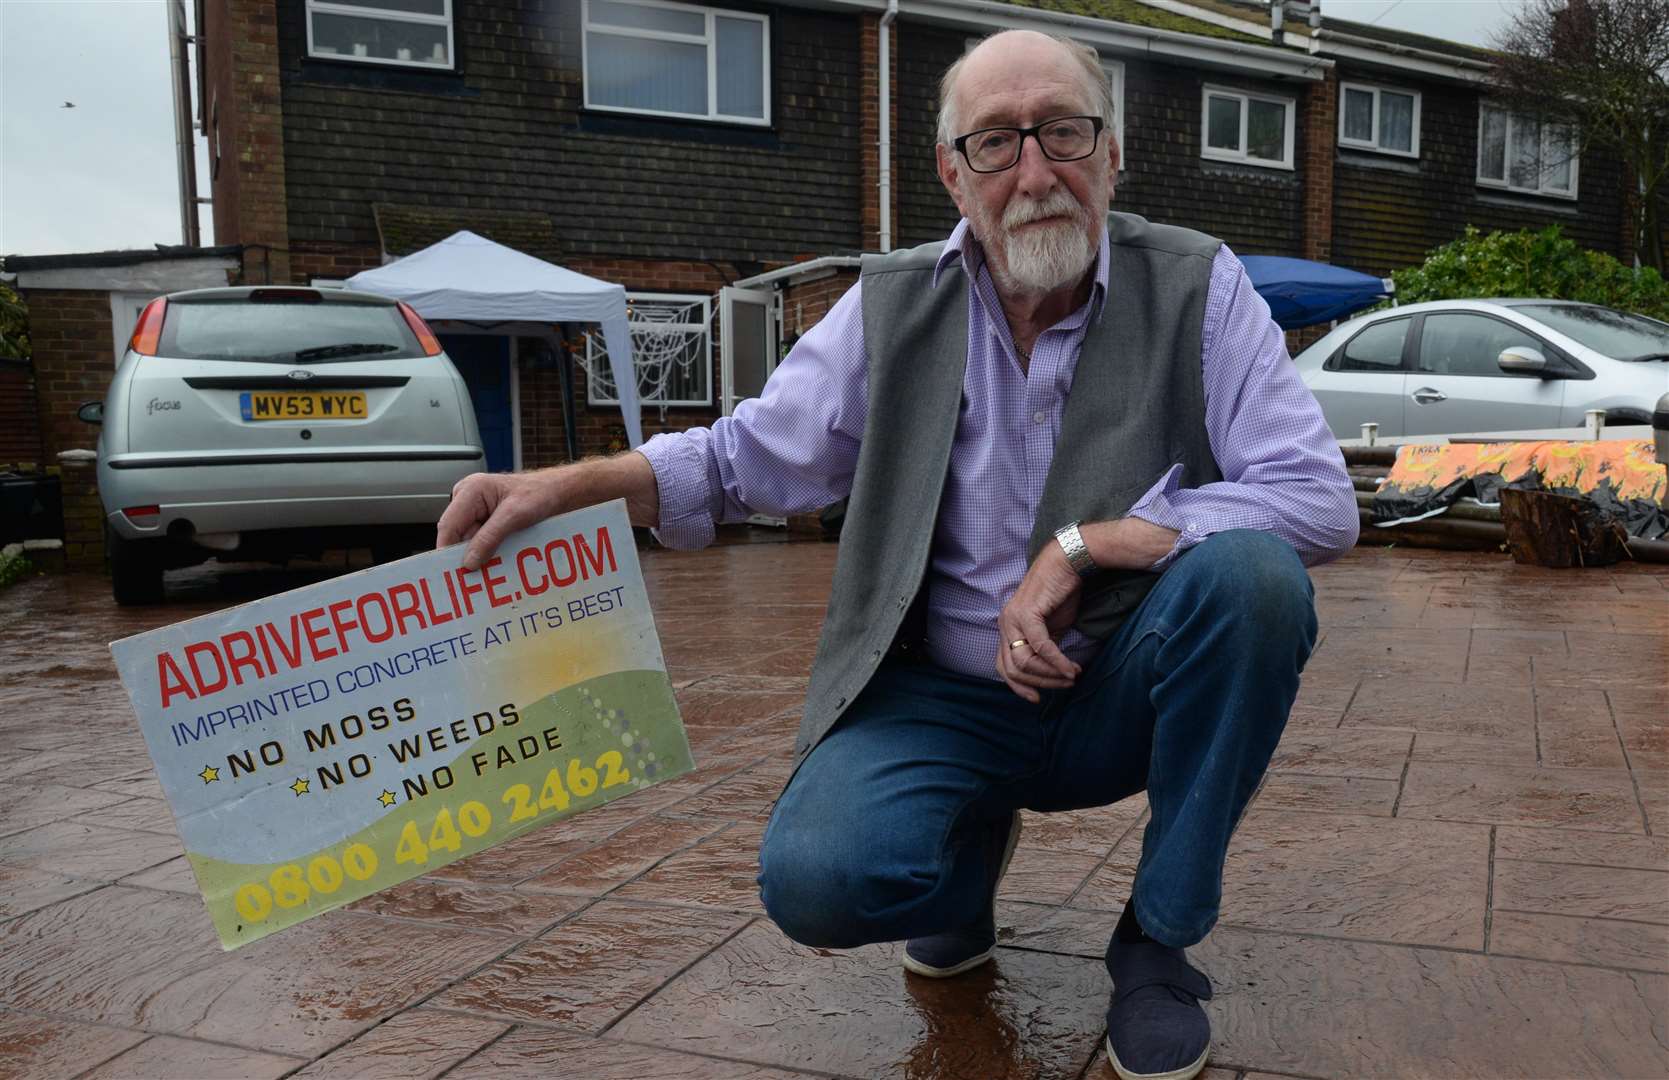 John Price paid thousands for a new driveway but was conned